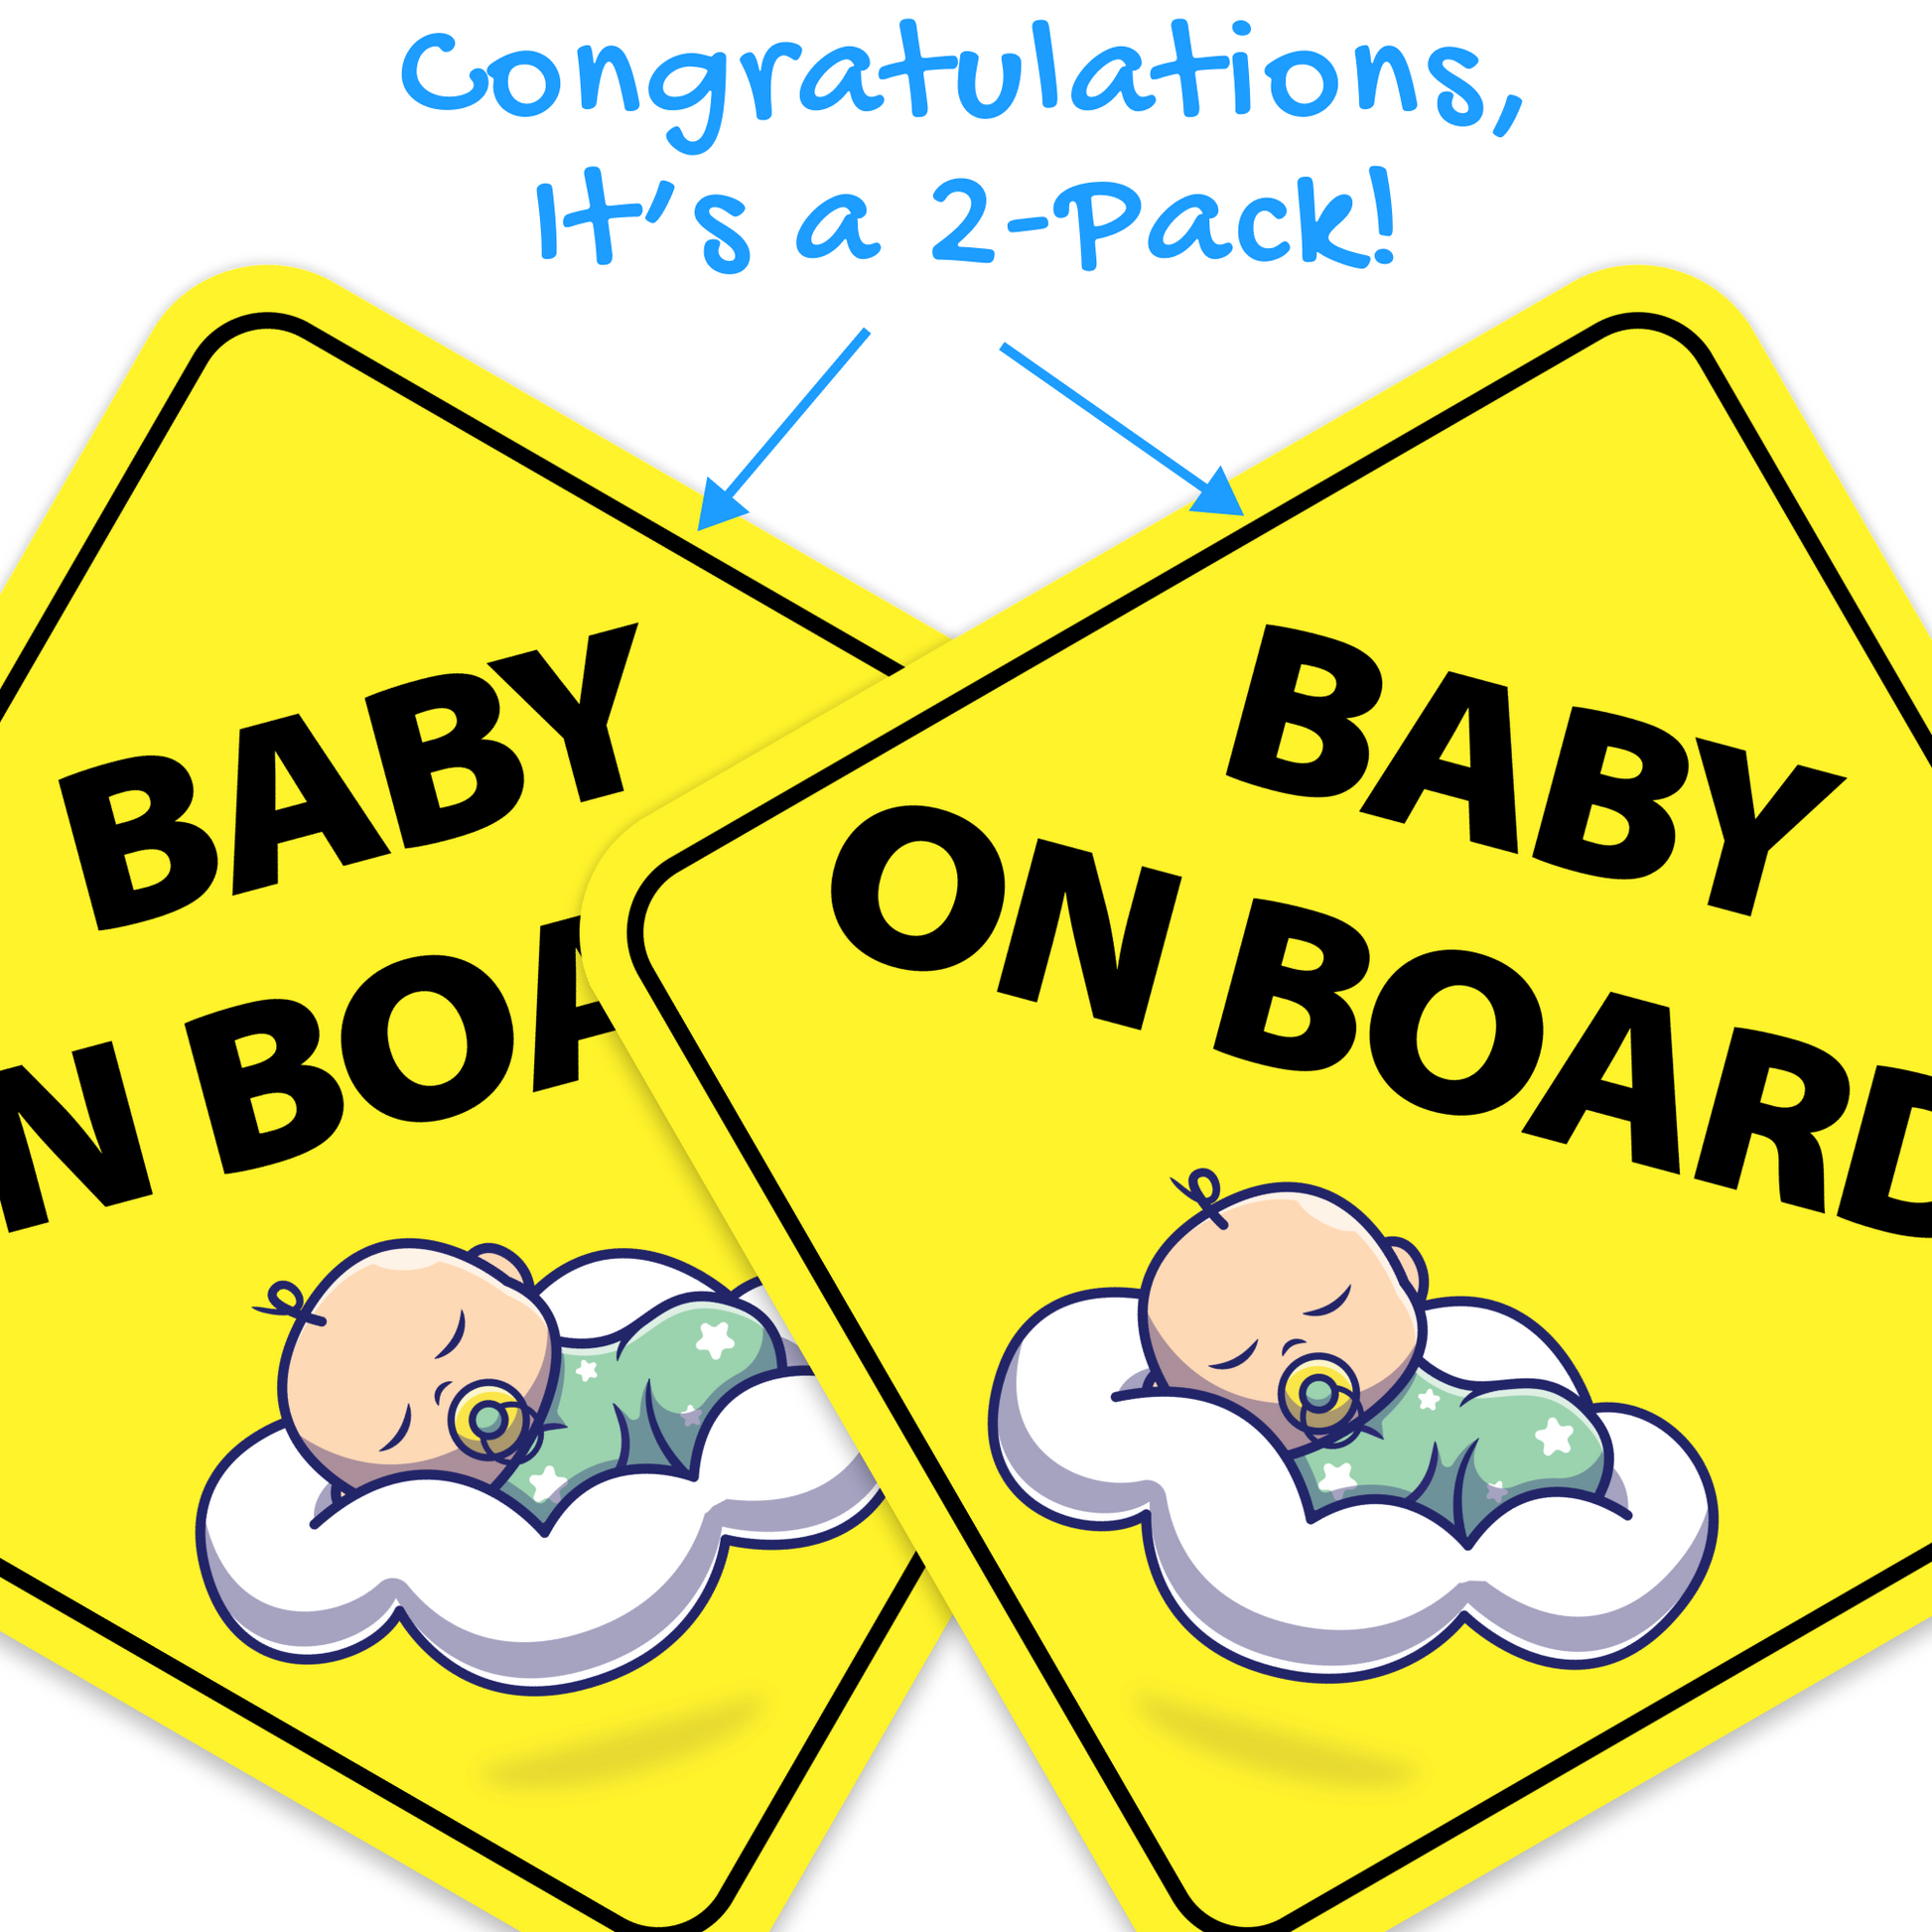 Baby on Board Stickers - No Paint Damage - Sleepy Baby (2-Pack